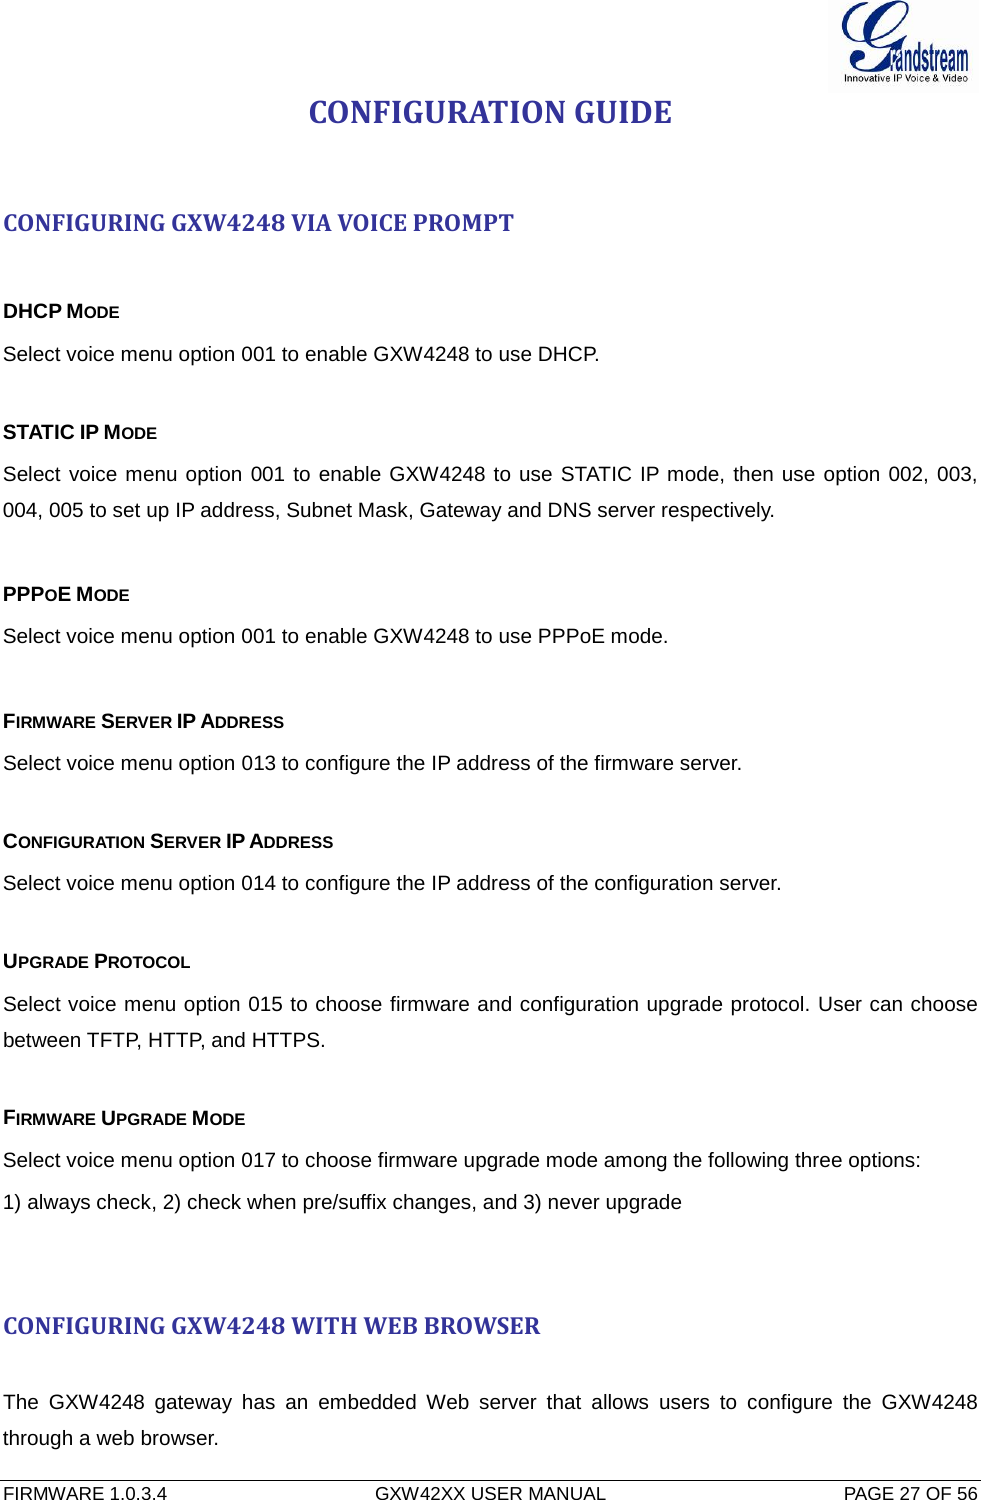  FIRMWARE 1.0.3.4  GXW42XX USER MANUAL  PAGE 27 OF 56     CONFIGURATION GUIDE  CONFIGURING GXW4248 VIA VOICE PROMPT  DHCP MODE Select voice menu option 001 to enable GXW4248 to use DHCP.  STATIC IP MODE  Select voice menu option 001 to enable GXW4248 to use STATIC IP mode, then use option 002, 003, 004, 005 to set up IP address, Subnet Mask, Gateway and DNS server respectively.  PPPOE MODE  Select voice menu option 001 to enable GXW4248 to use PPPoE mode.  FIRMWARE SERVER IP ADDRESS  Select voice menu option 013 to configure the IP address of the firmware server.   CONFIGURATION SERVER IP ADDRESS  Select voice menu option 014 to configure the IP address of the configuration server.   UPGRADE PROTOCOL  Select voice menu option 015 to choose firmware and configuration upgrade protocol. User can choose between TFTP, HTTP, and HTTPS.  FIRMWARE UPGRADE MODE  Select voice menu option 017 to choose firmware upgrade mode among the following three options:  1) always check, 2) check when pre/suffix changes, and 3) never upgrade   CONFIGURING GXW4248 WITH WEB BROWSER  The  GXW4248 gateway  has an embedded Web server that allows  users to configure the GXW4248 through a web browser. 